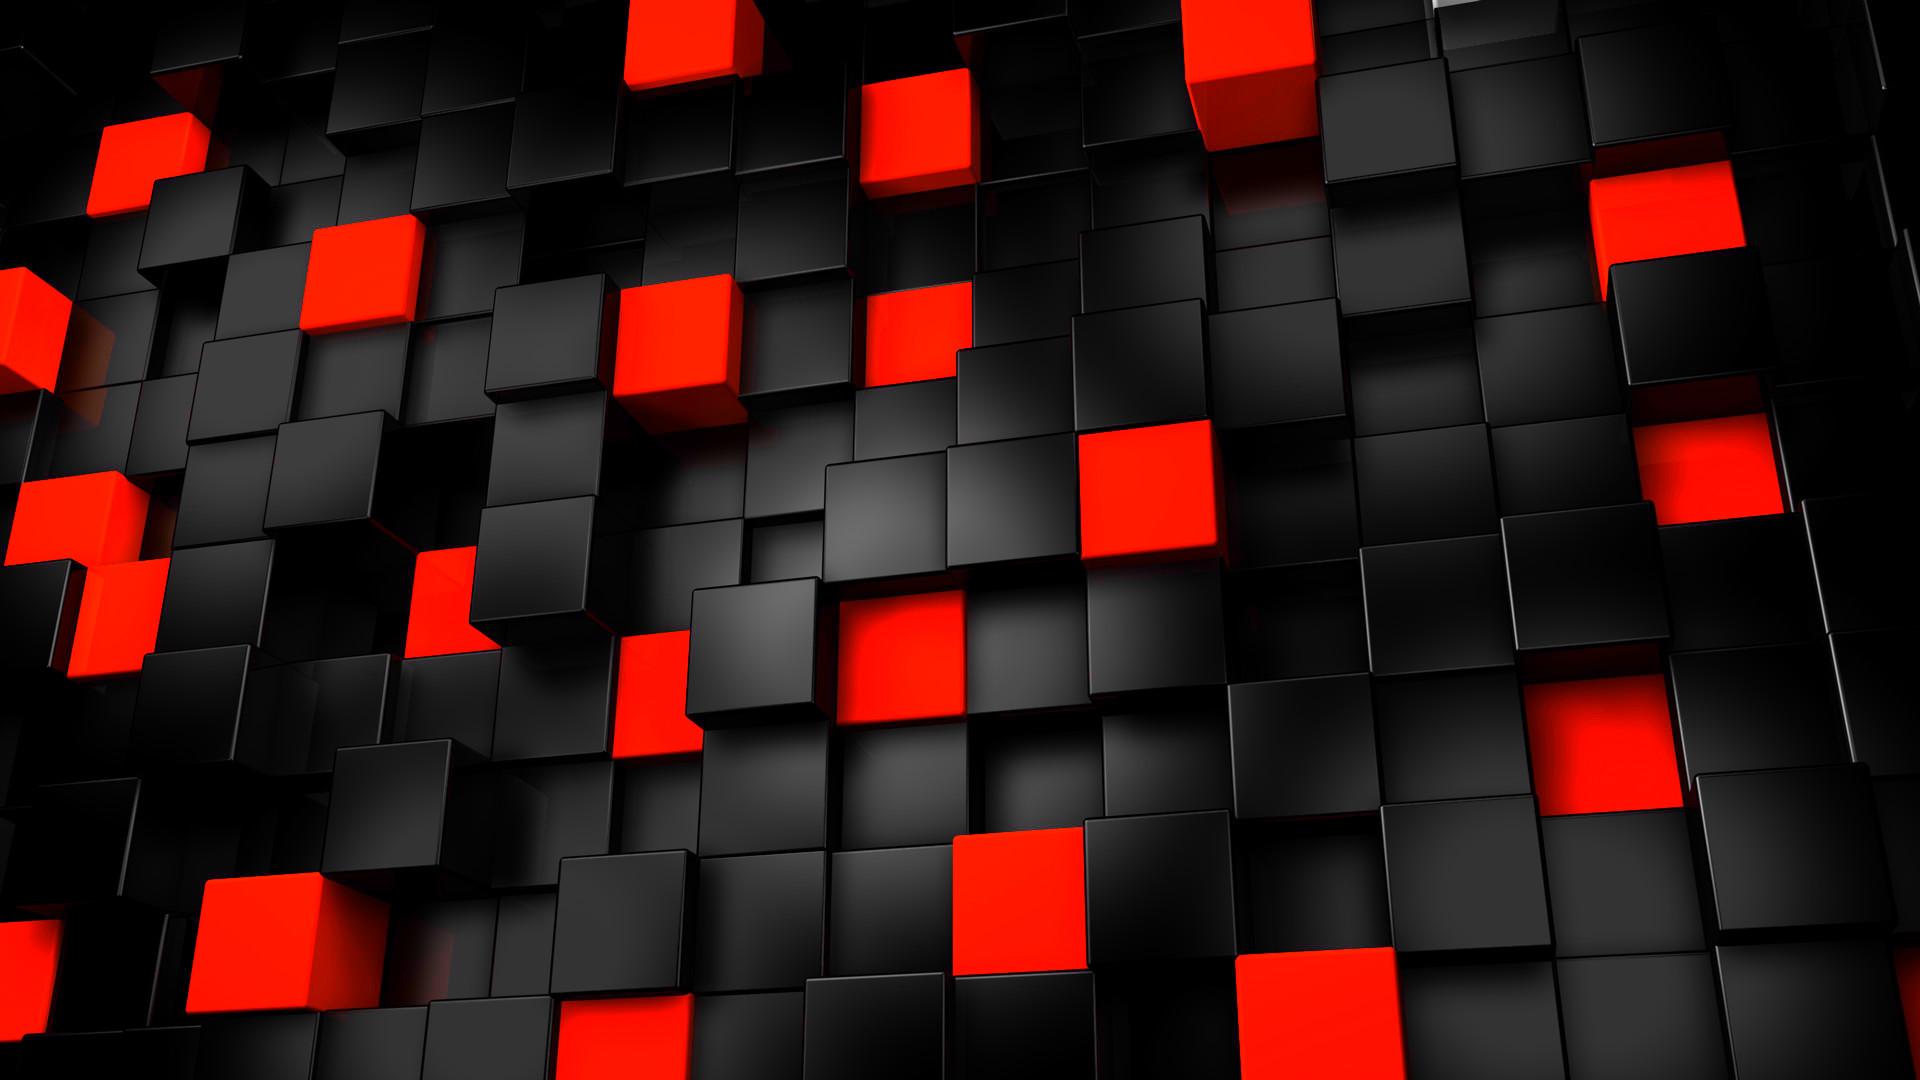 1920x1080 Abstract Art Black and White Red Wallpaper HD 1080p | I HD .